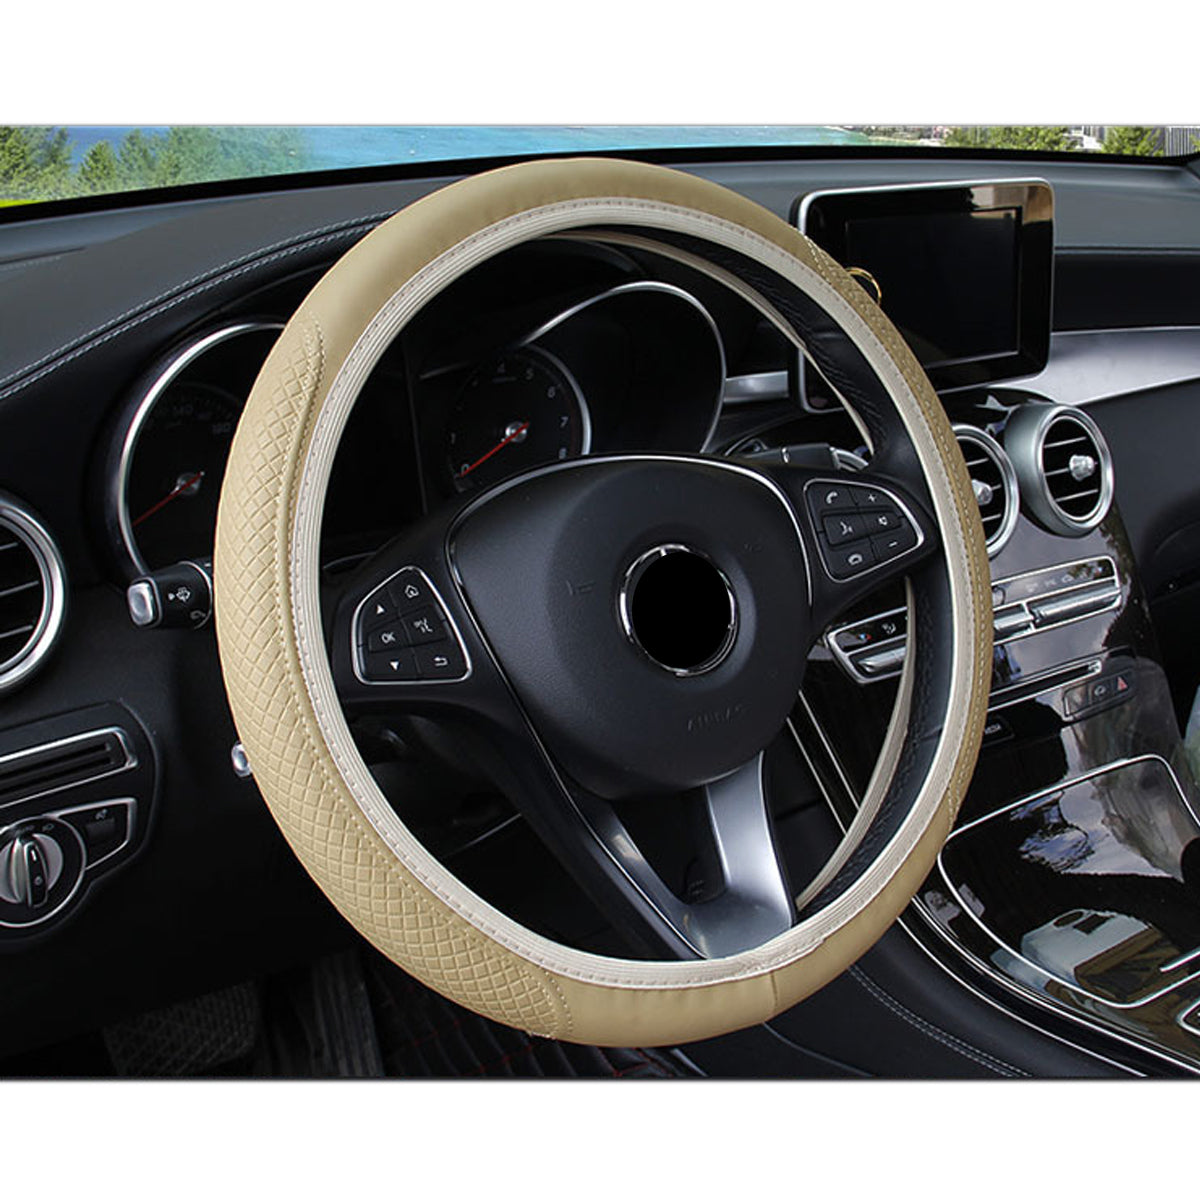 37-39cm Leather Car Truck Steering Wheel Covers Breathable Anti-Slip Comfortable - Auto GoShop